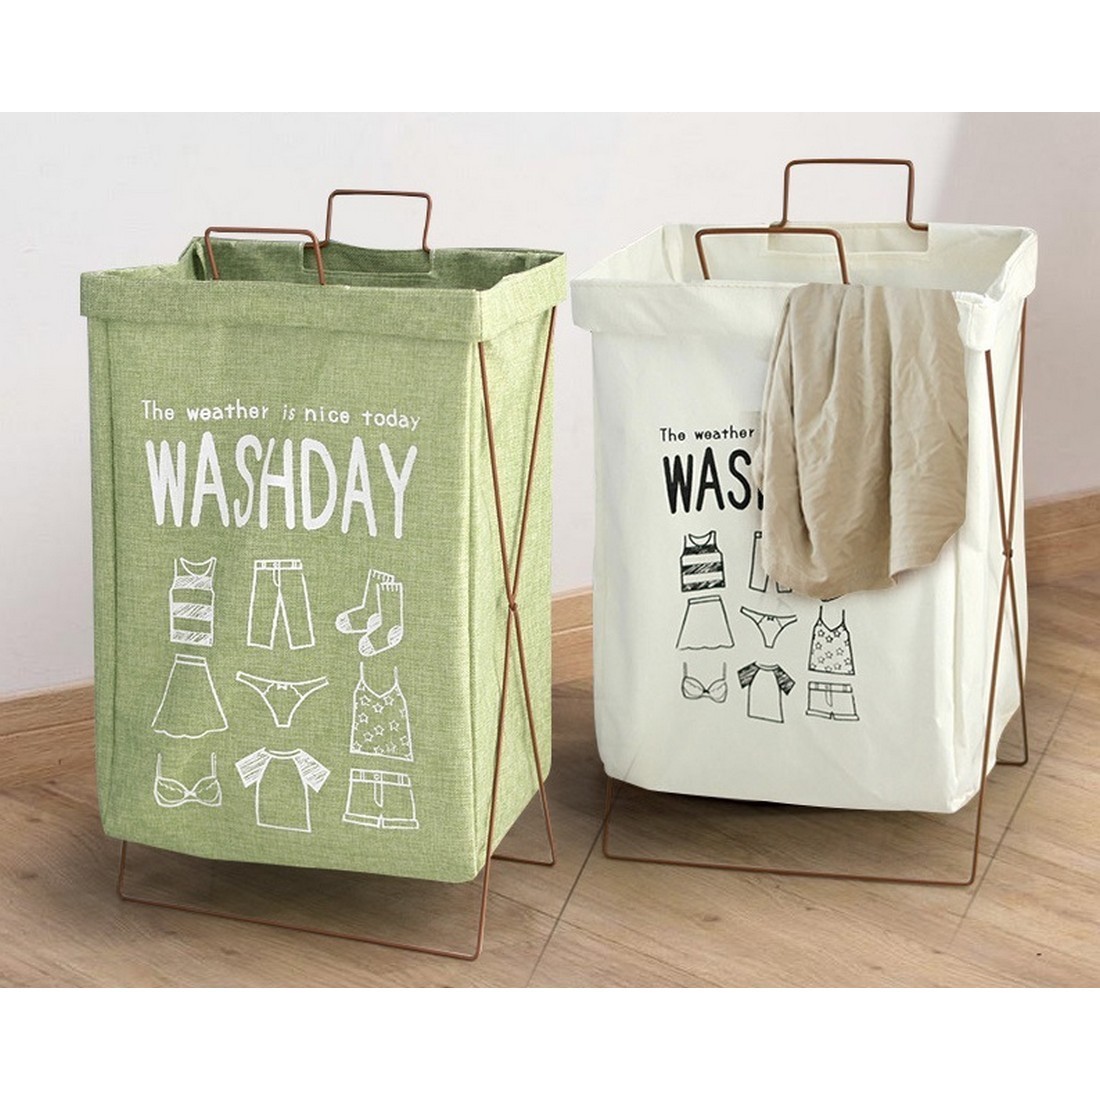  laundry basket iron frame folding storage basket bag bus room bed room WASHDAY cover none green 